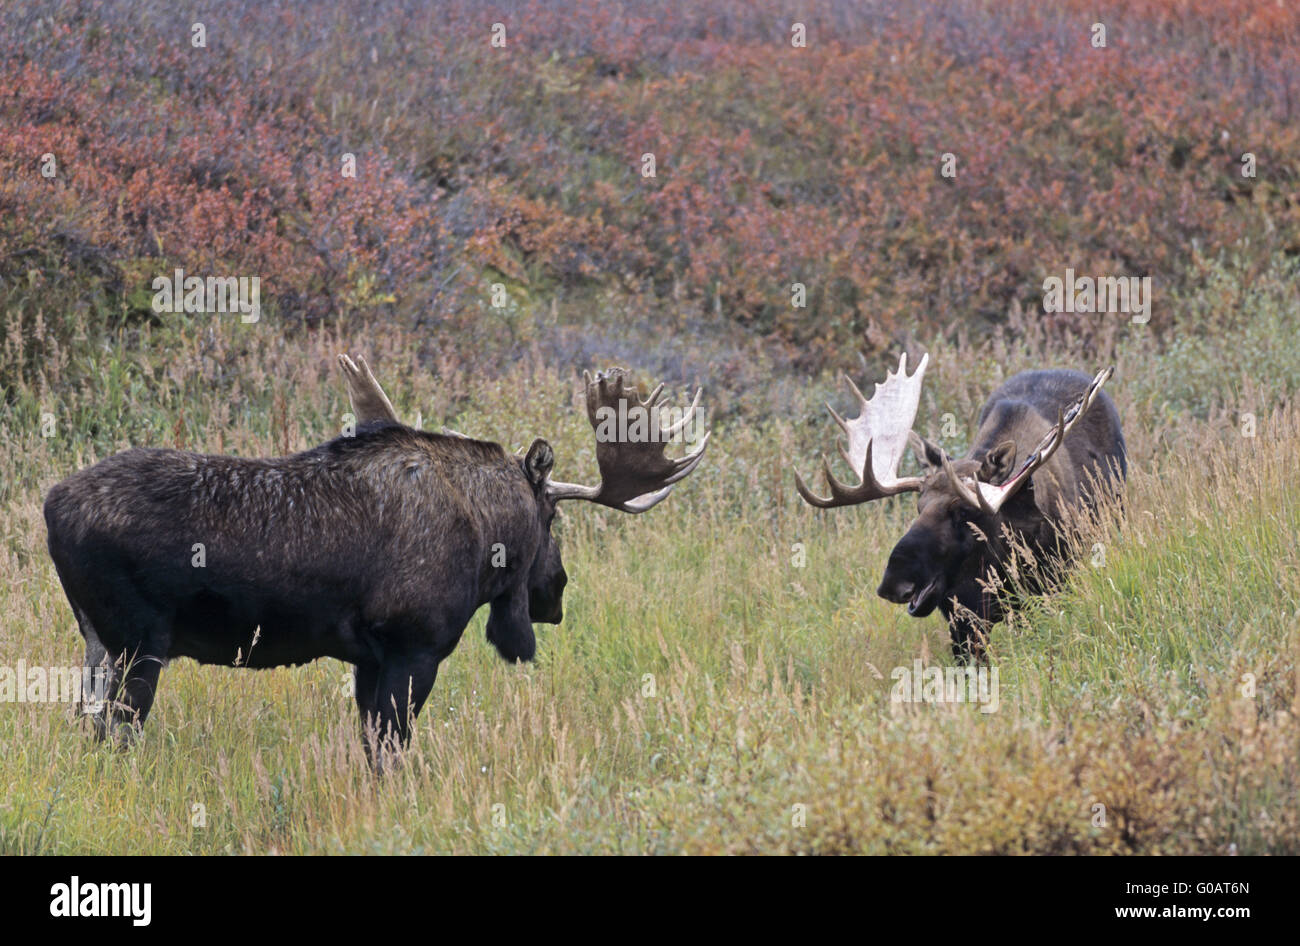 Bull Moose playfully fighting in the tundra Stock Photo